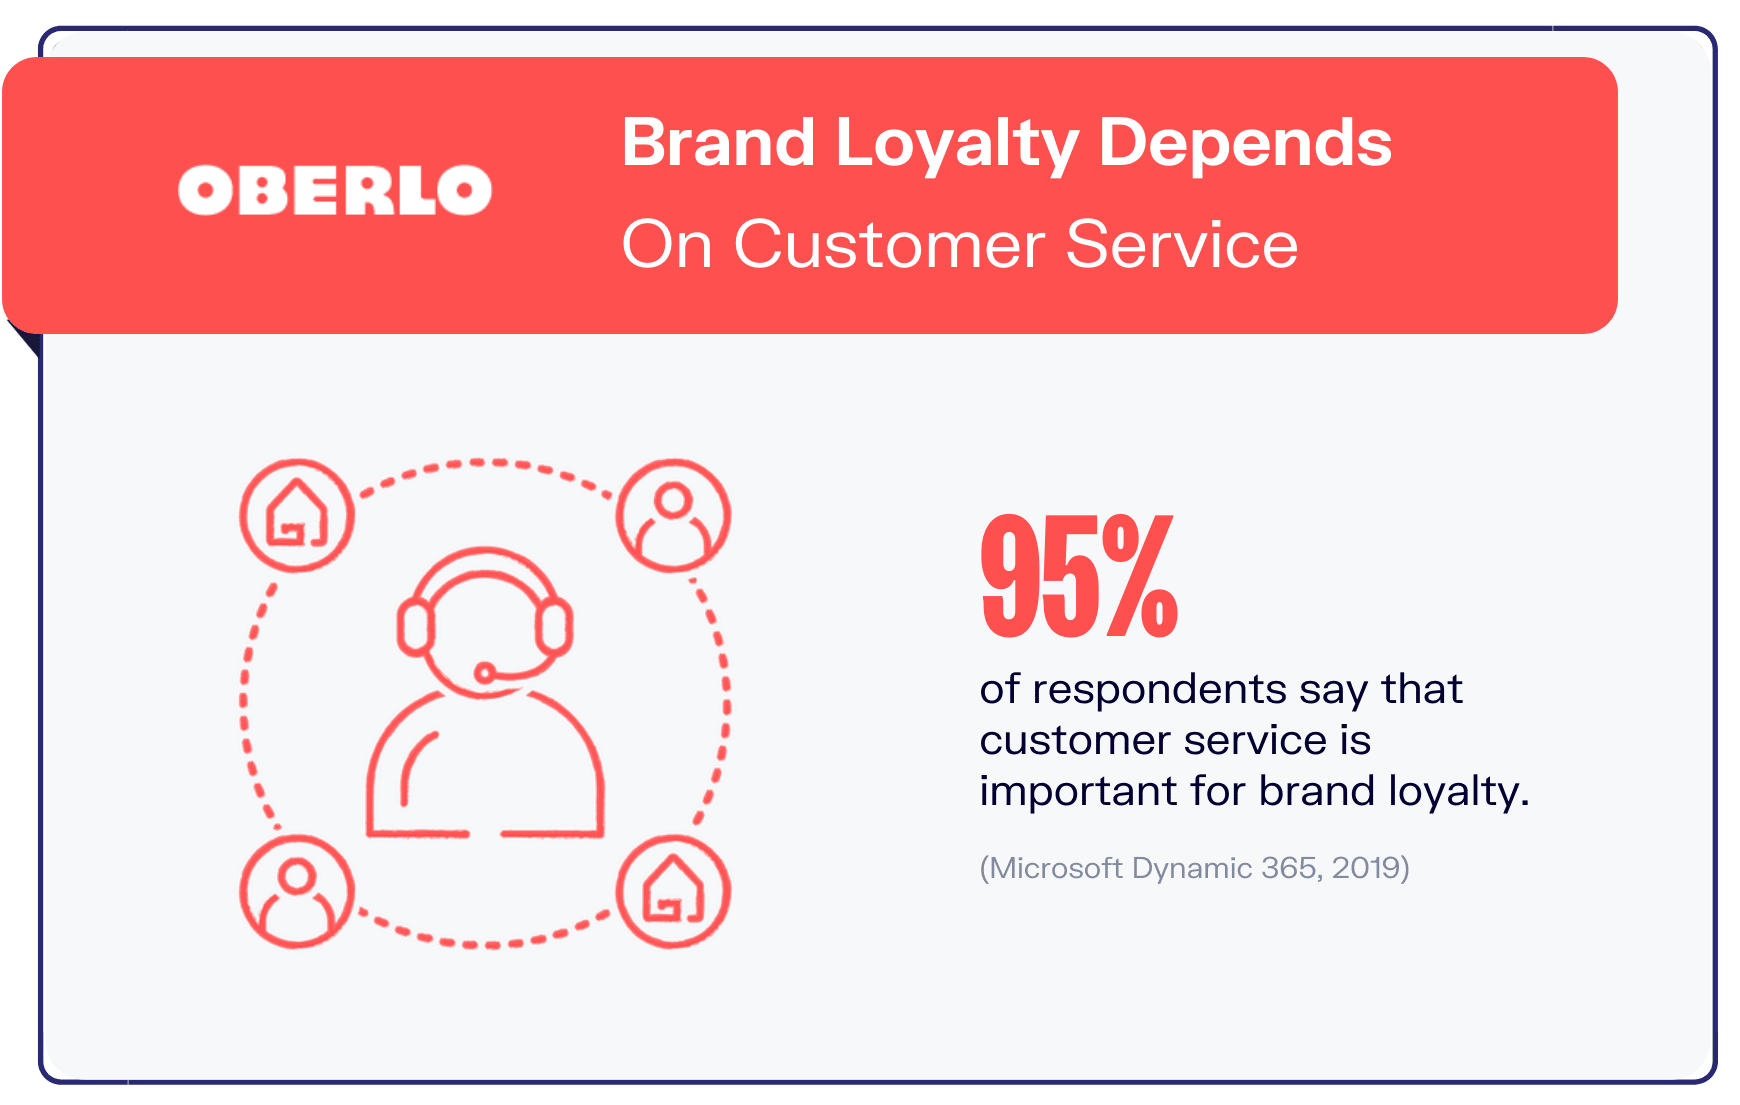 infographic shows that 95% of respondents say that brand loyalty depends on customer service